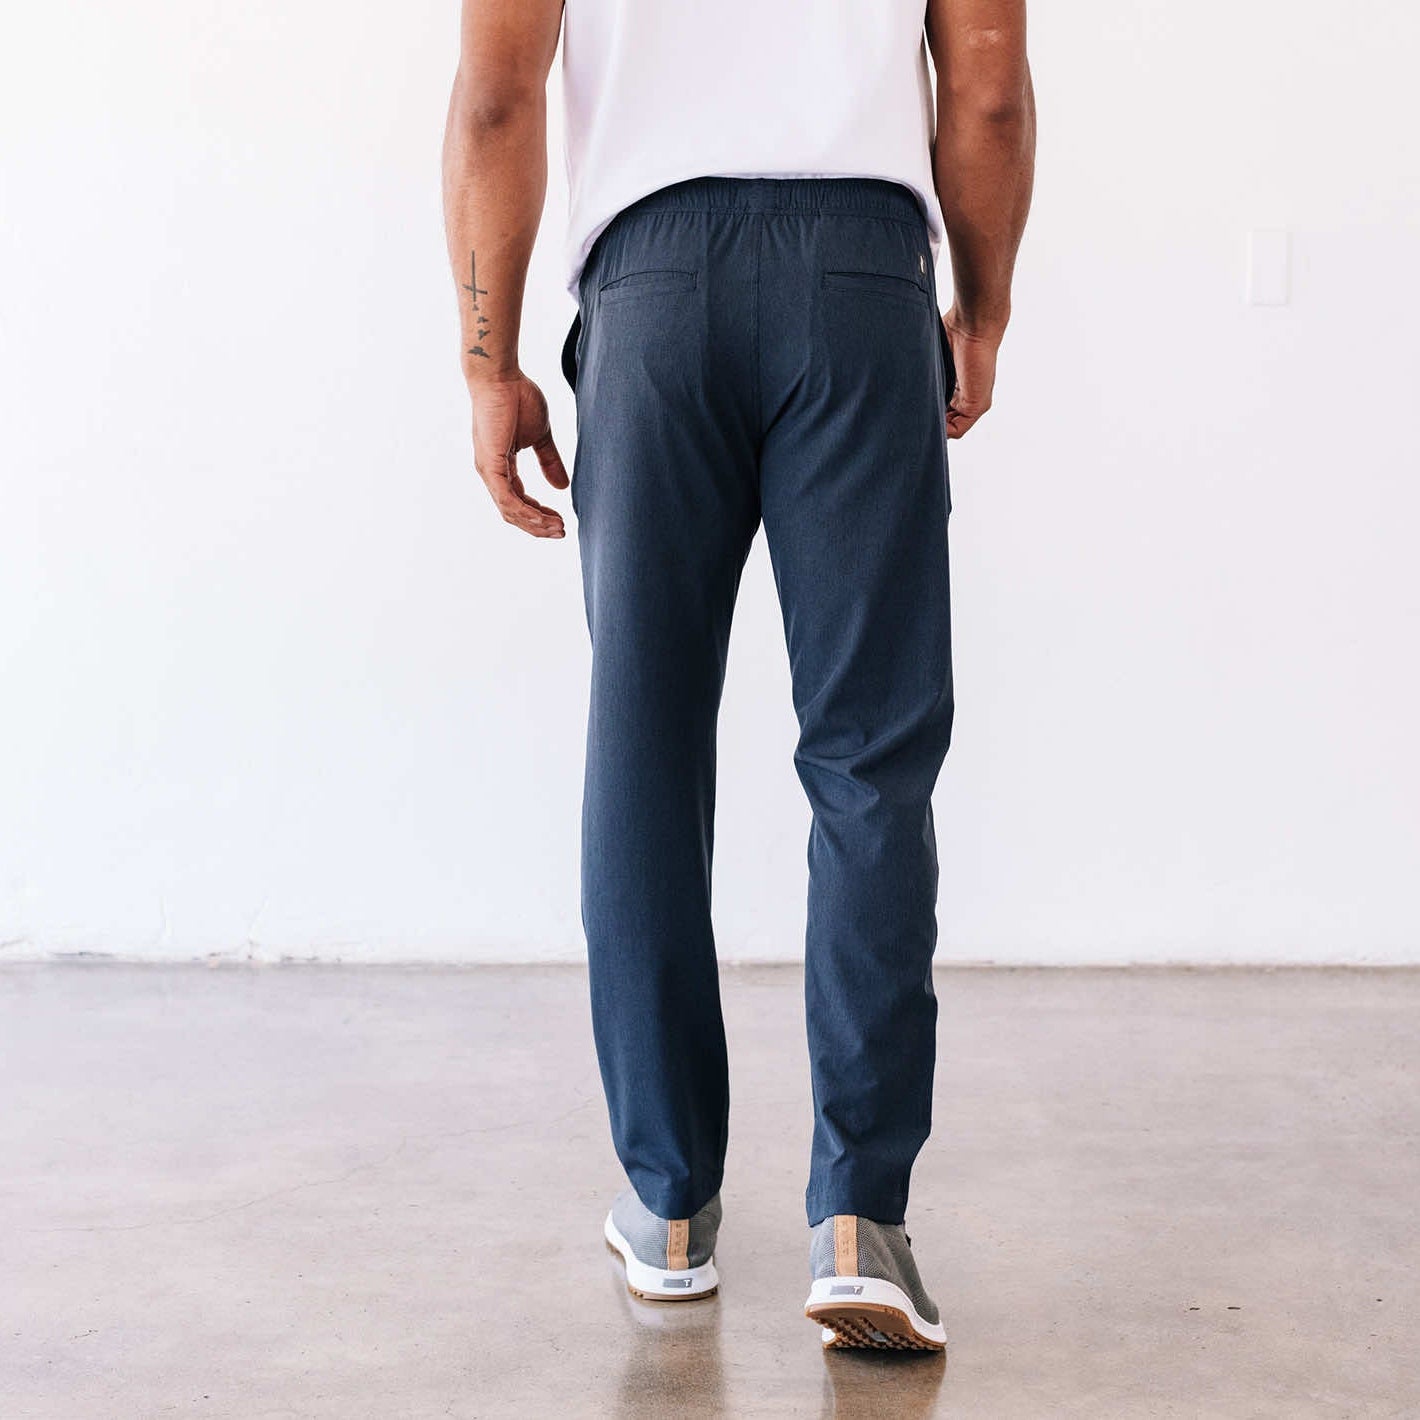 Linksoul Saturday AC Pant in Navy